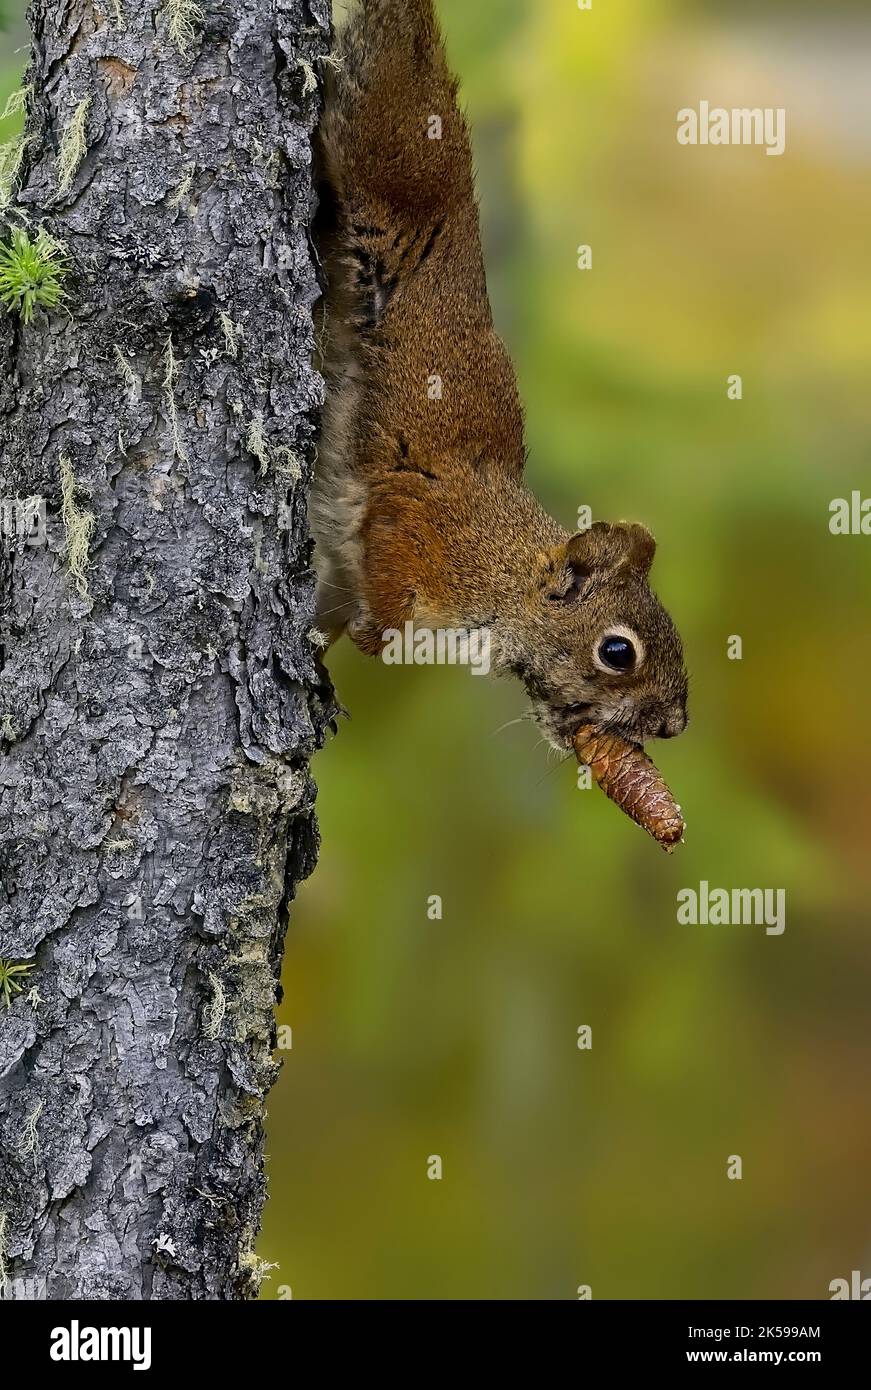 A red squirrel 'Tamiasciurus hudsonicus', climbing down a spruce tree whild holding a spruce cone in his mouth Stock Photo